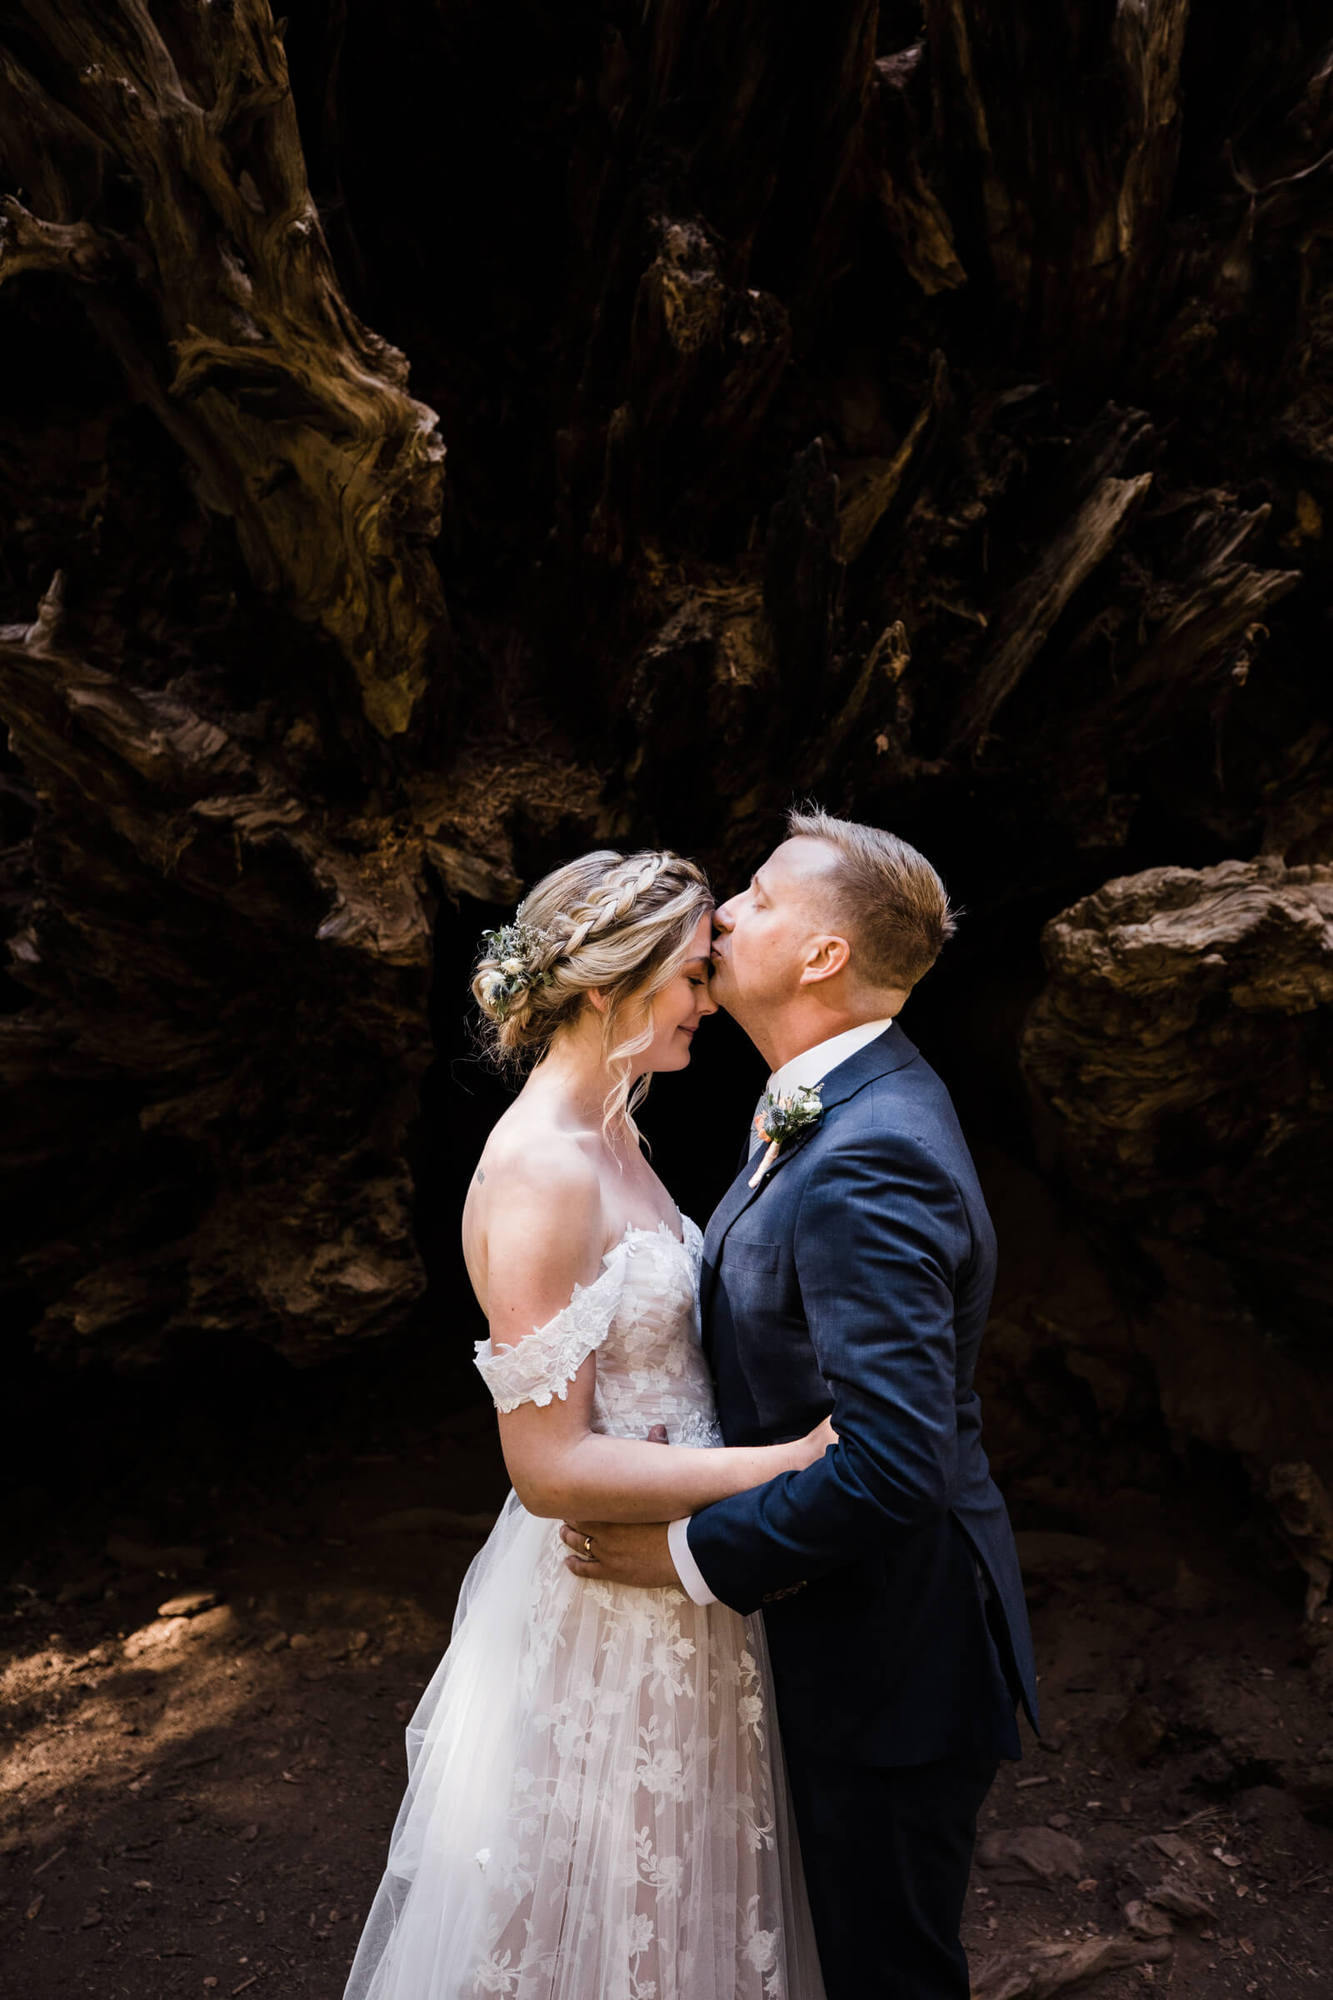 Having a Yosemite wedding is a total dream. This couple adventured around the park in epic fashion and is not to be missed.